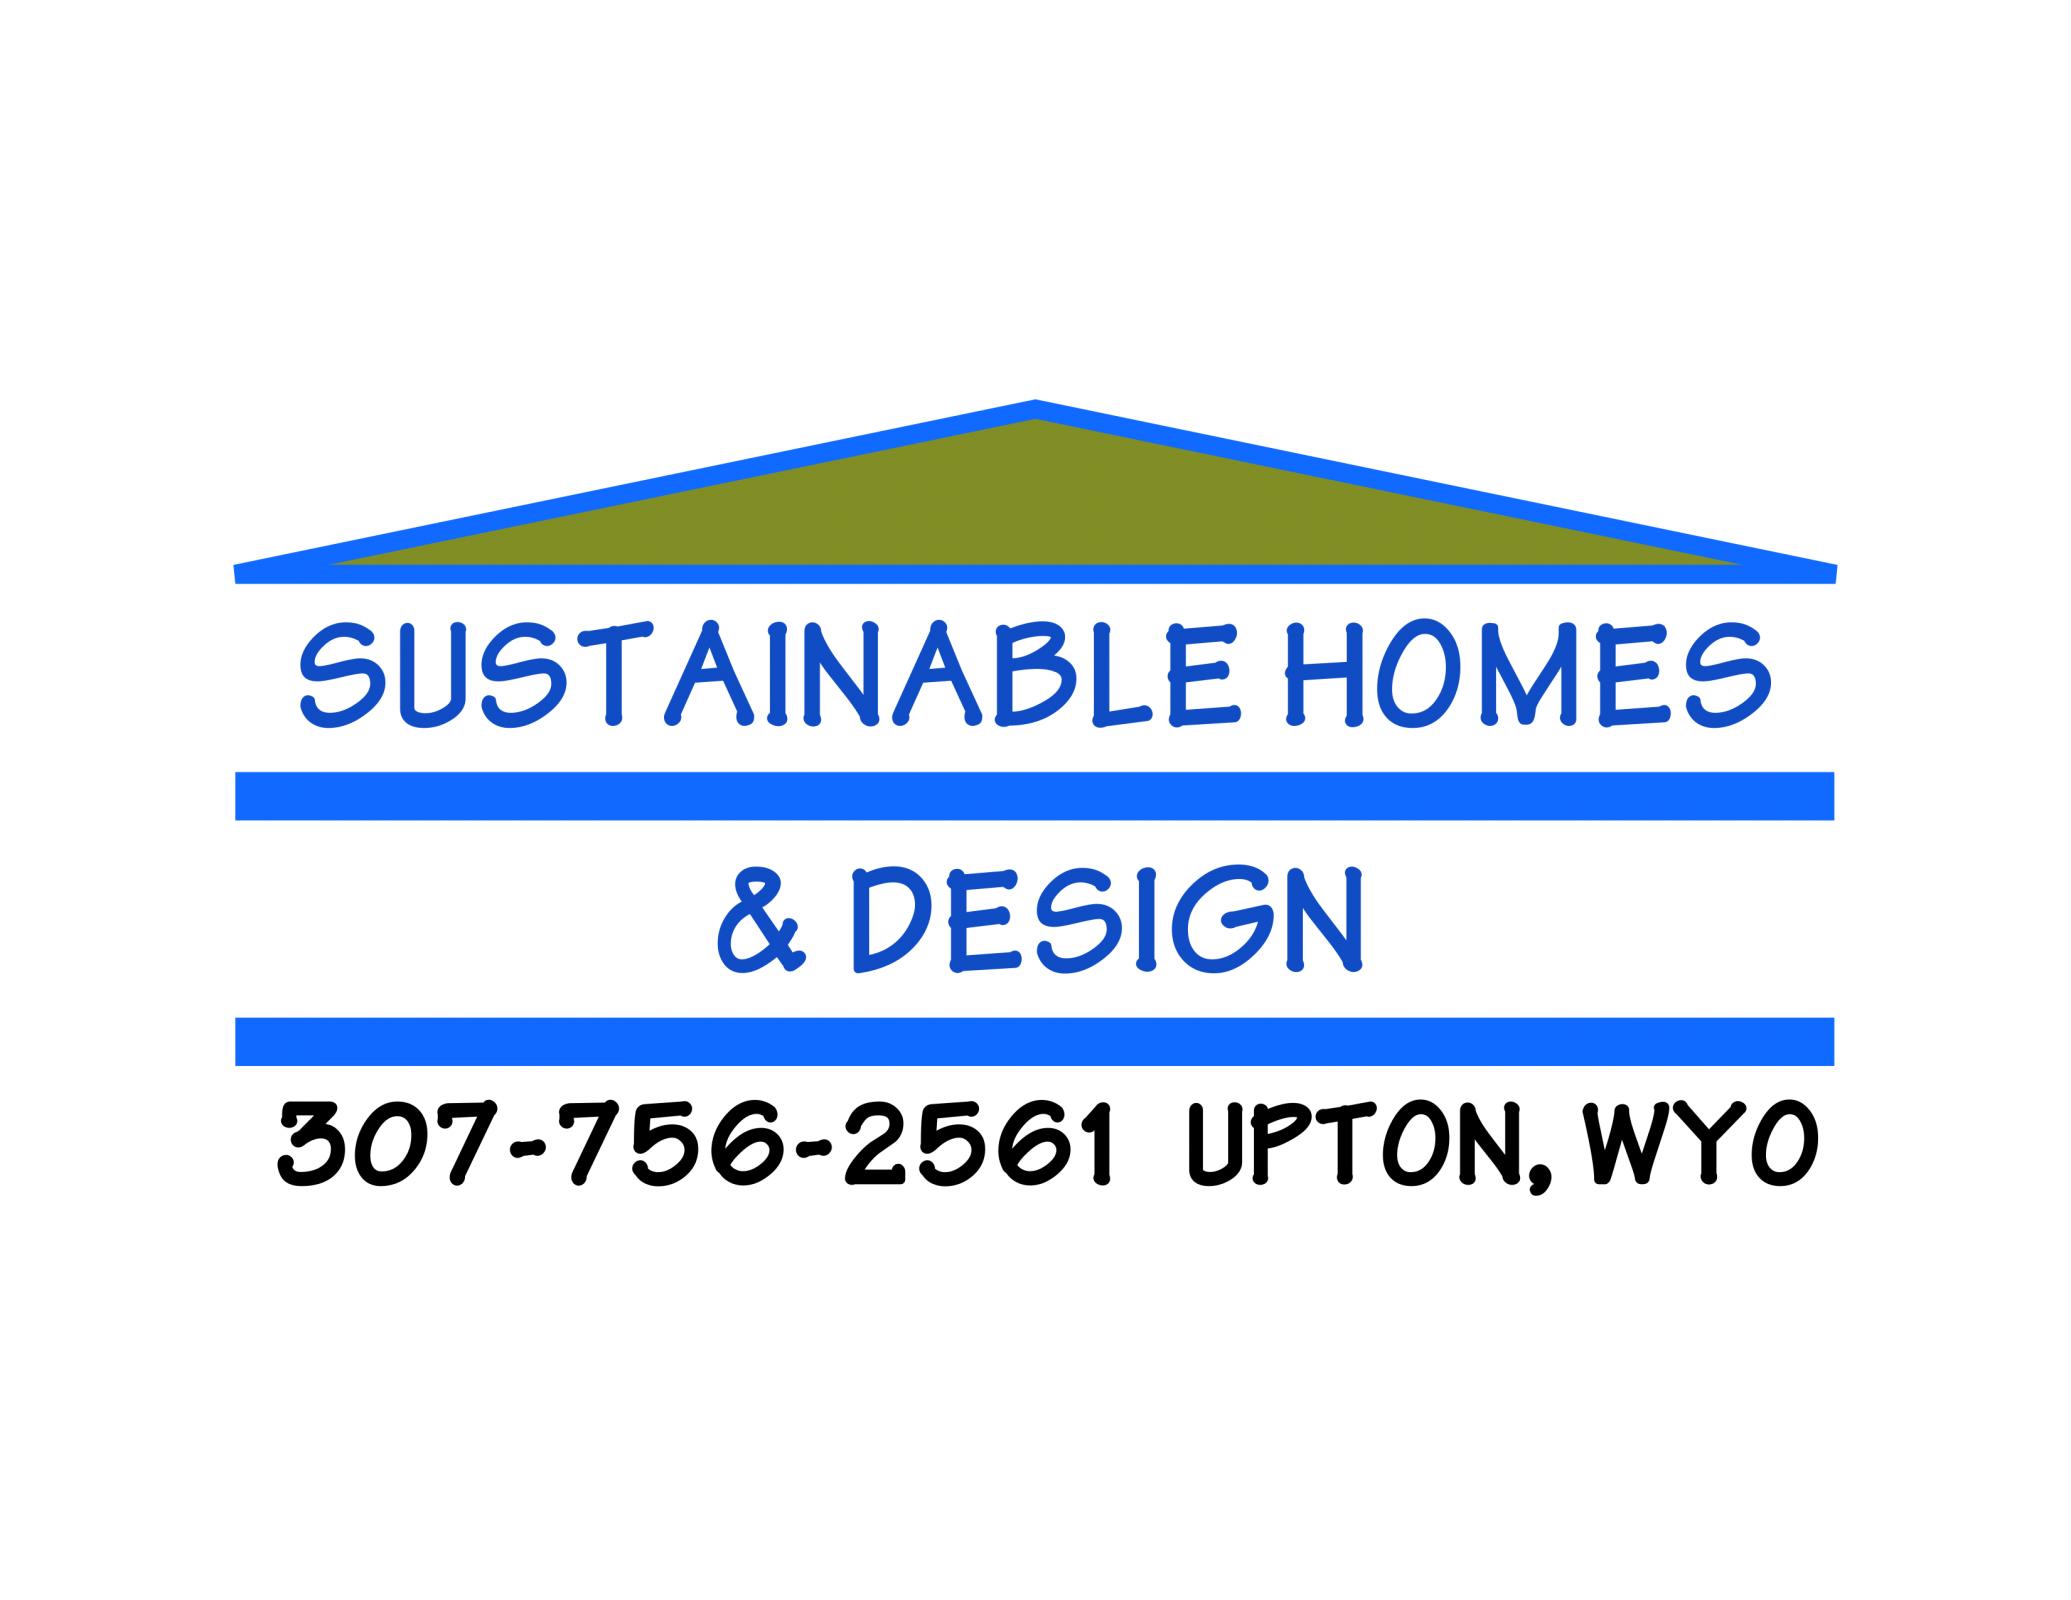 Sustainable Home & Design's Image